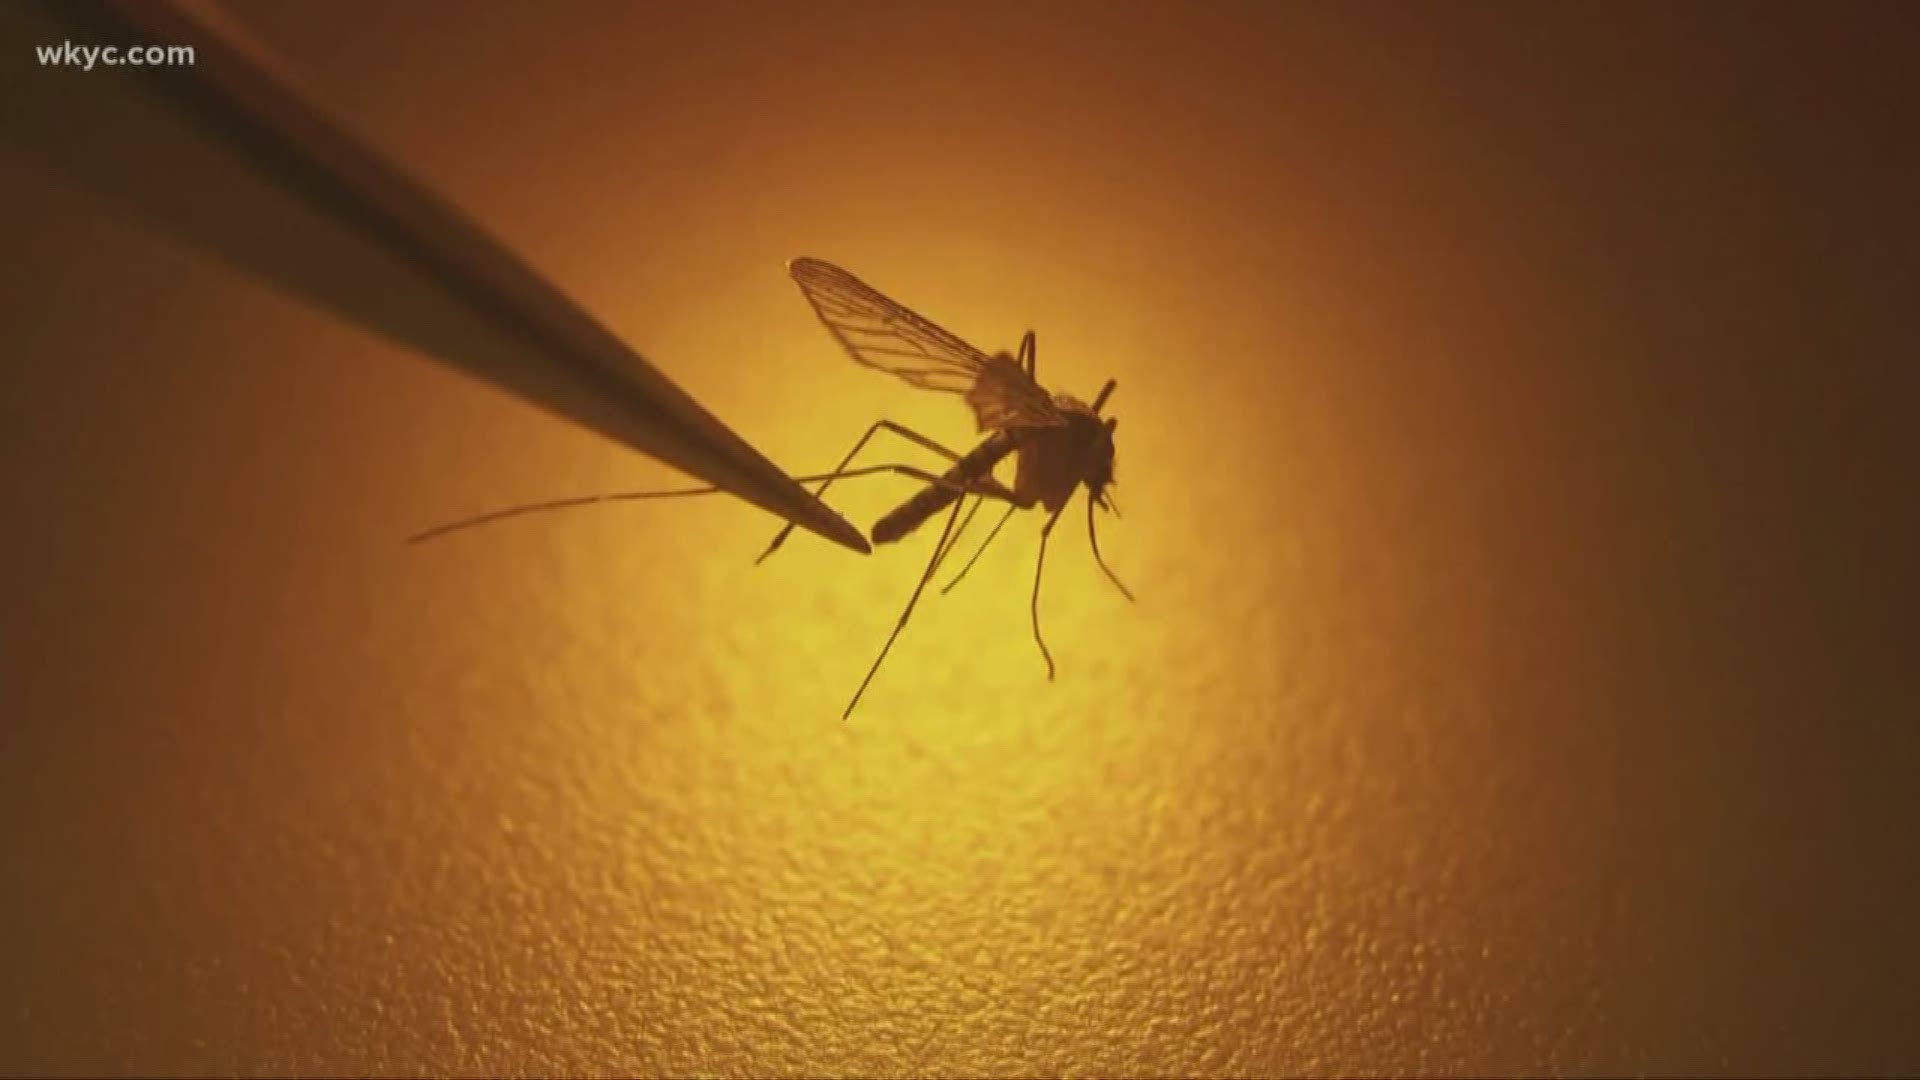 Health officials are on alert in Michigan after a 14-year-old girl contracted Eastern equine encephalitis (EEE), a rare and deadly mosquito virus that claimed the life of a Massachusetts woman over the weekend.